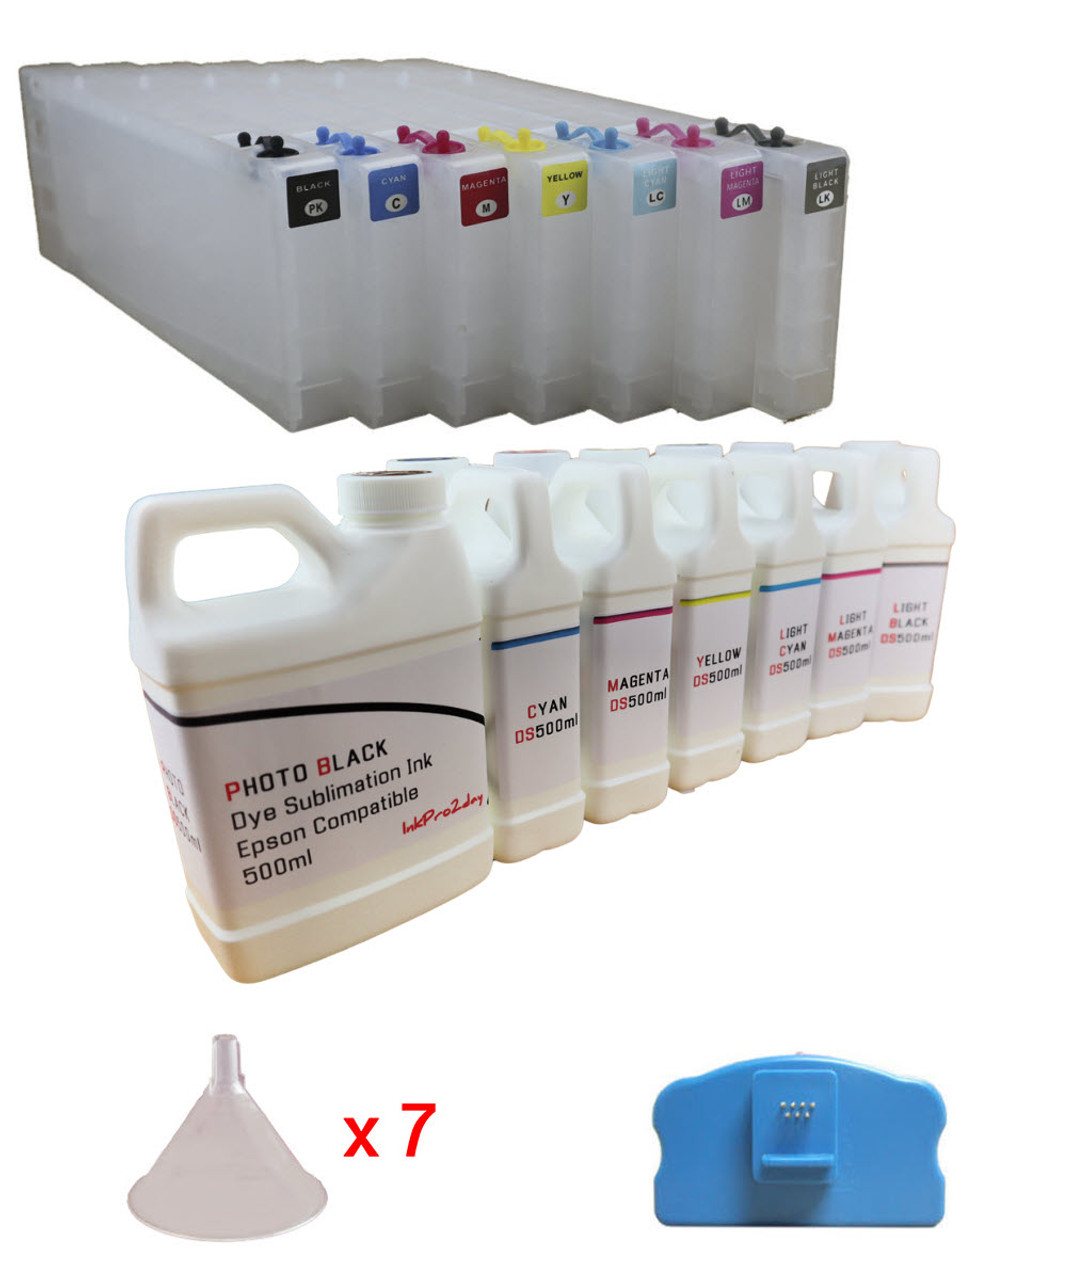 7 Refillable Ink Cartridge Package with 500ml Bottles Dye Sublimation Ink for Epson Stylus Pro 7600, 9600 Printers